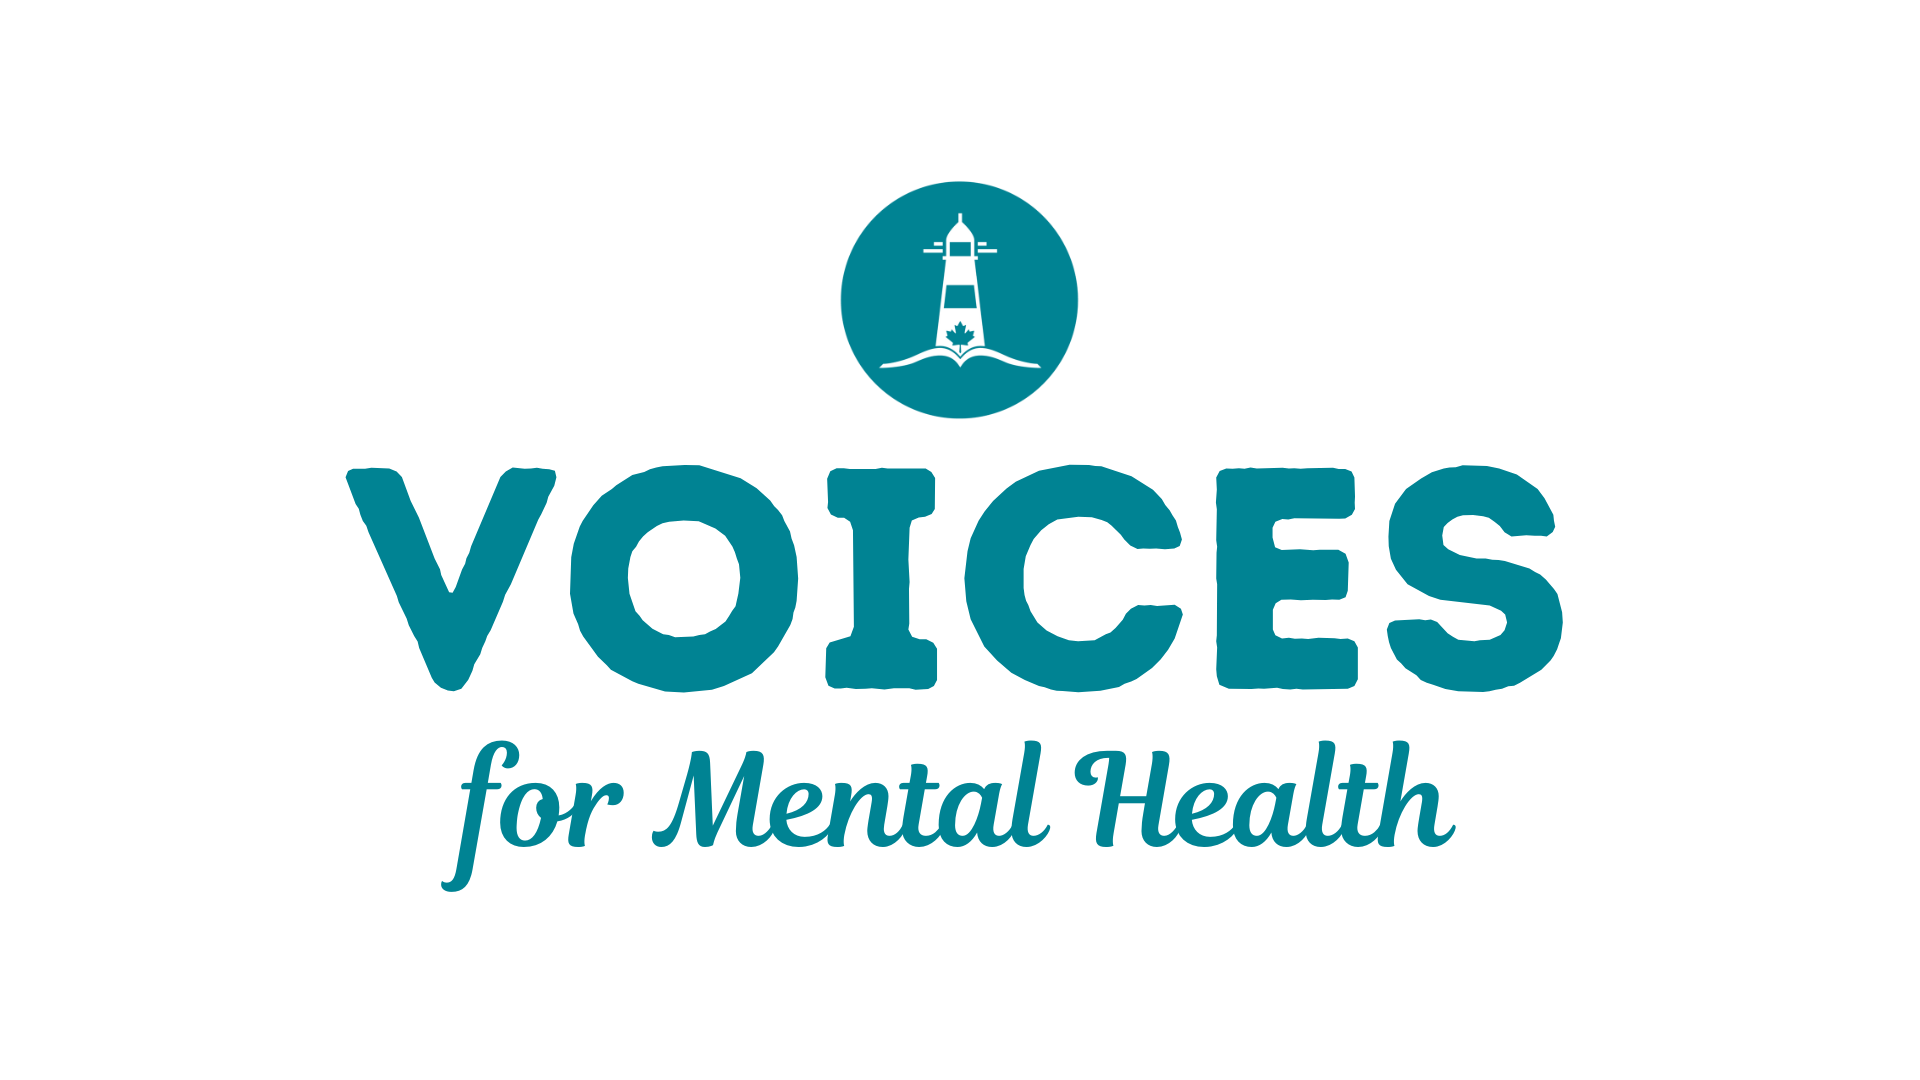 VOICES for Mental Health